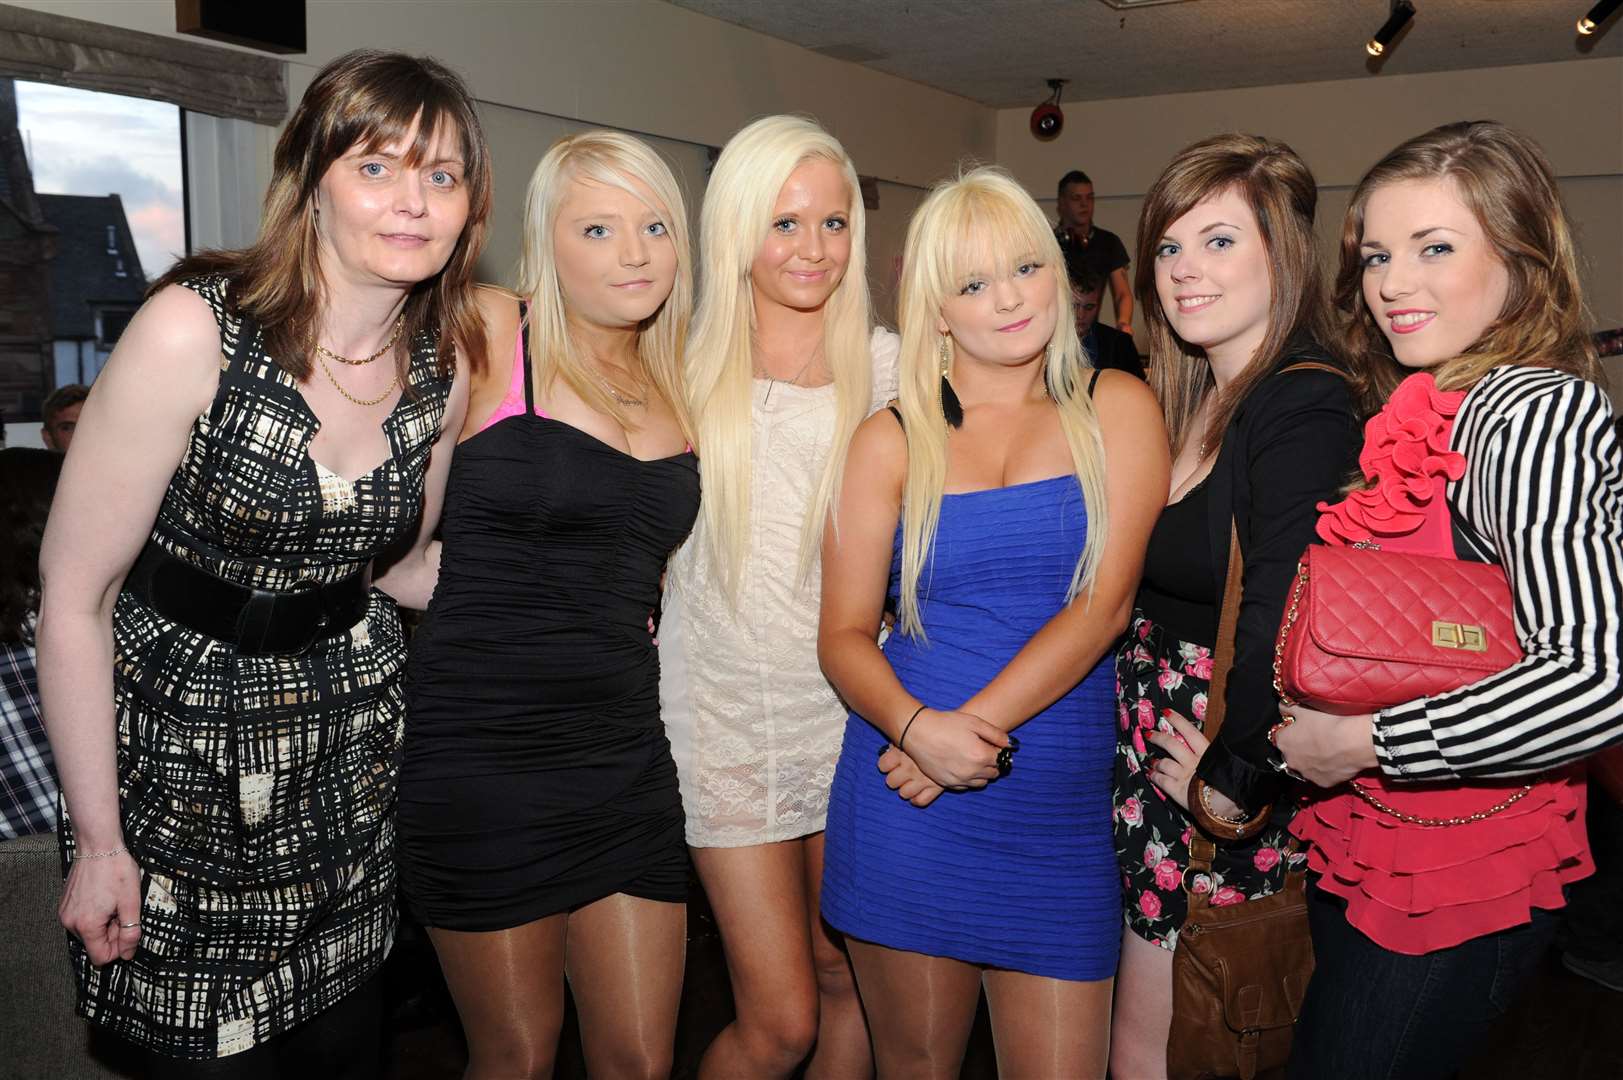 Enjoying there night at Masonic Club are (left) Maggie MacRae, Ariane Jamieson, Janye Allan, Sarah Esson, Amber Sanderson and Penny O'Brien. Picture by: Gary Anthony.